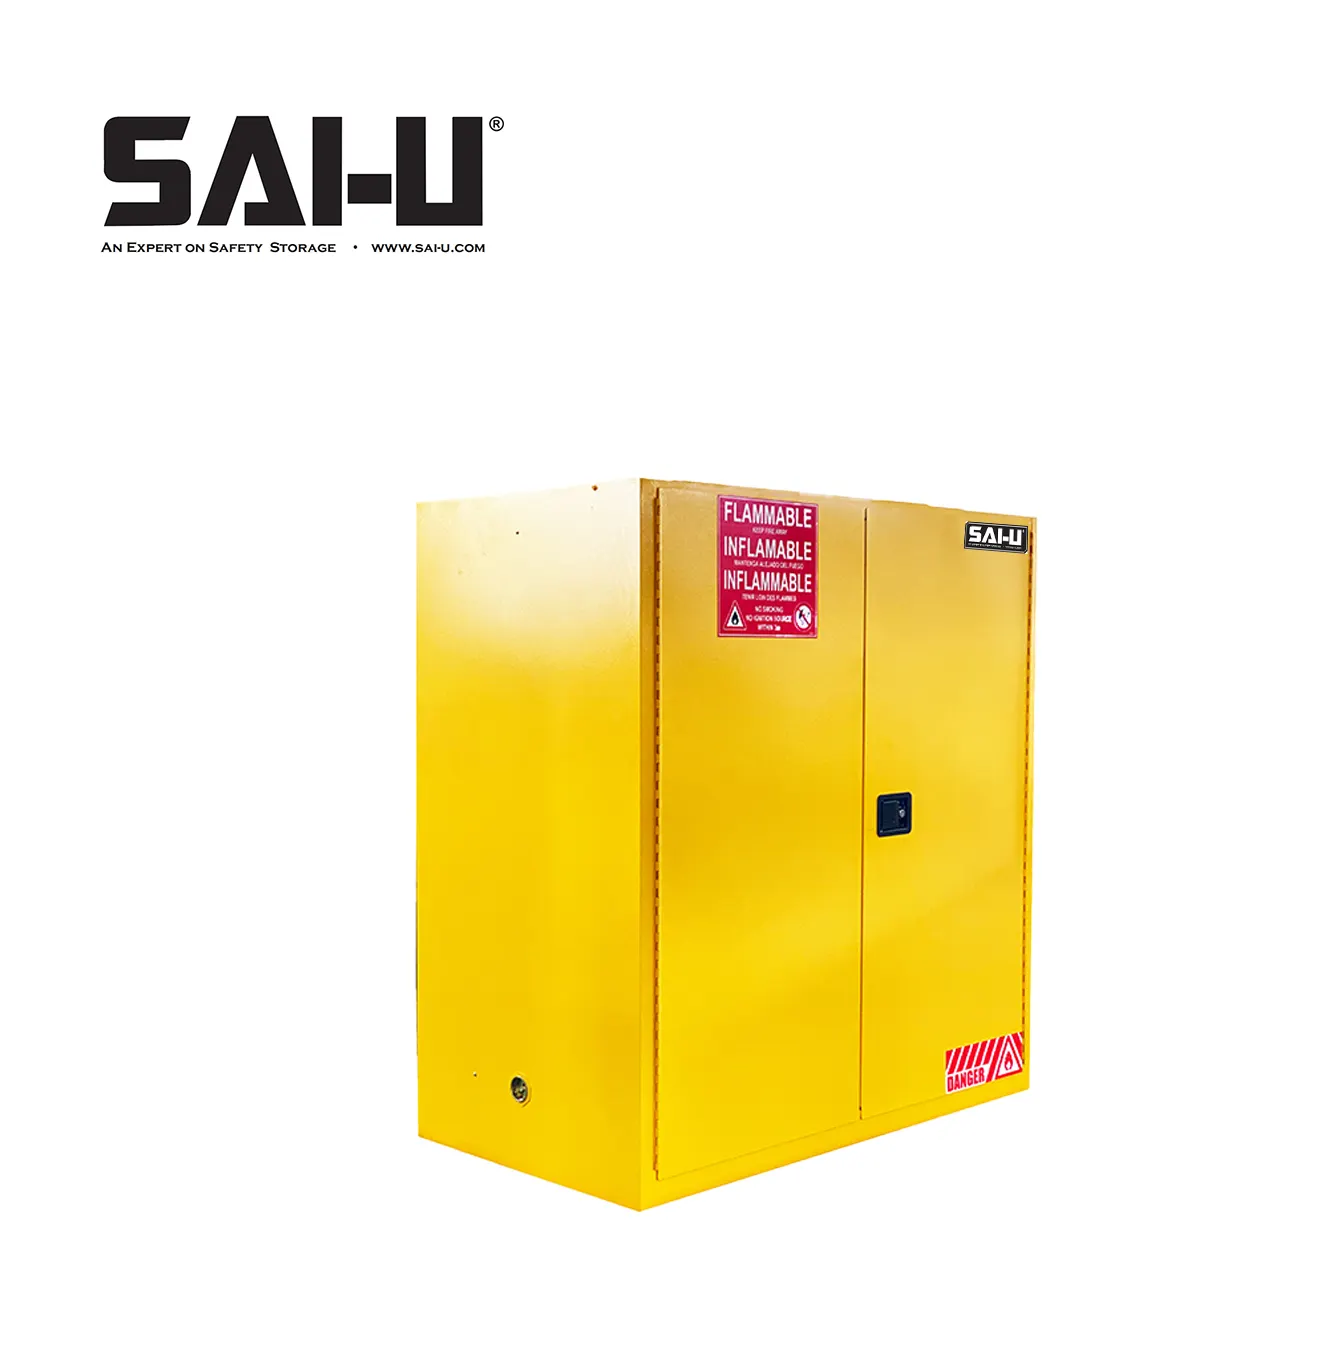 SAI-U FM CE Approved 120 Gal 2 Door Yellow Flammable chemical Liquid Safety Storage Cabinet